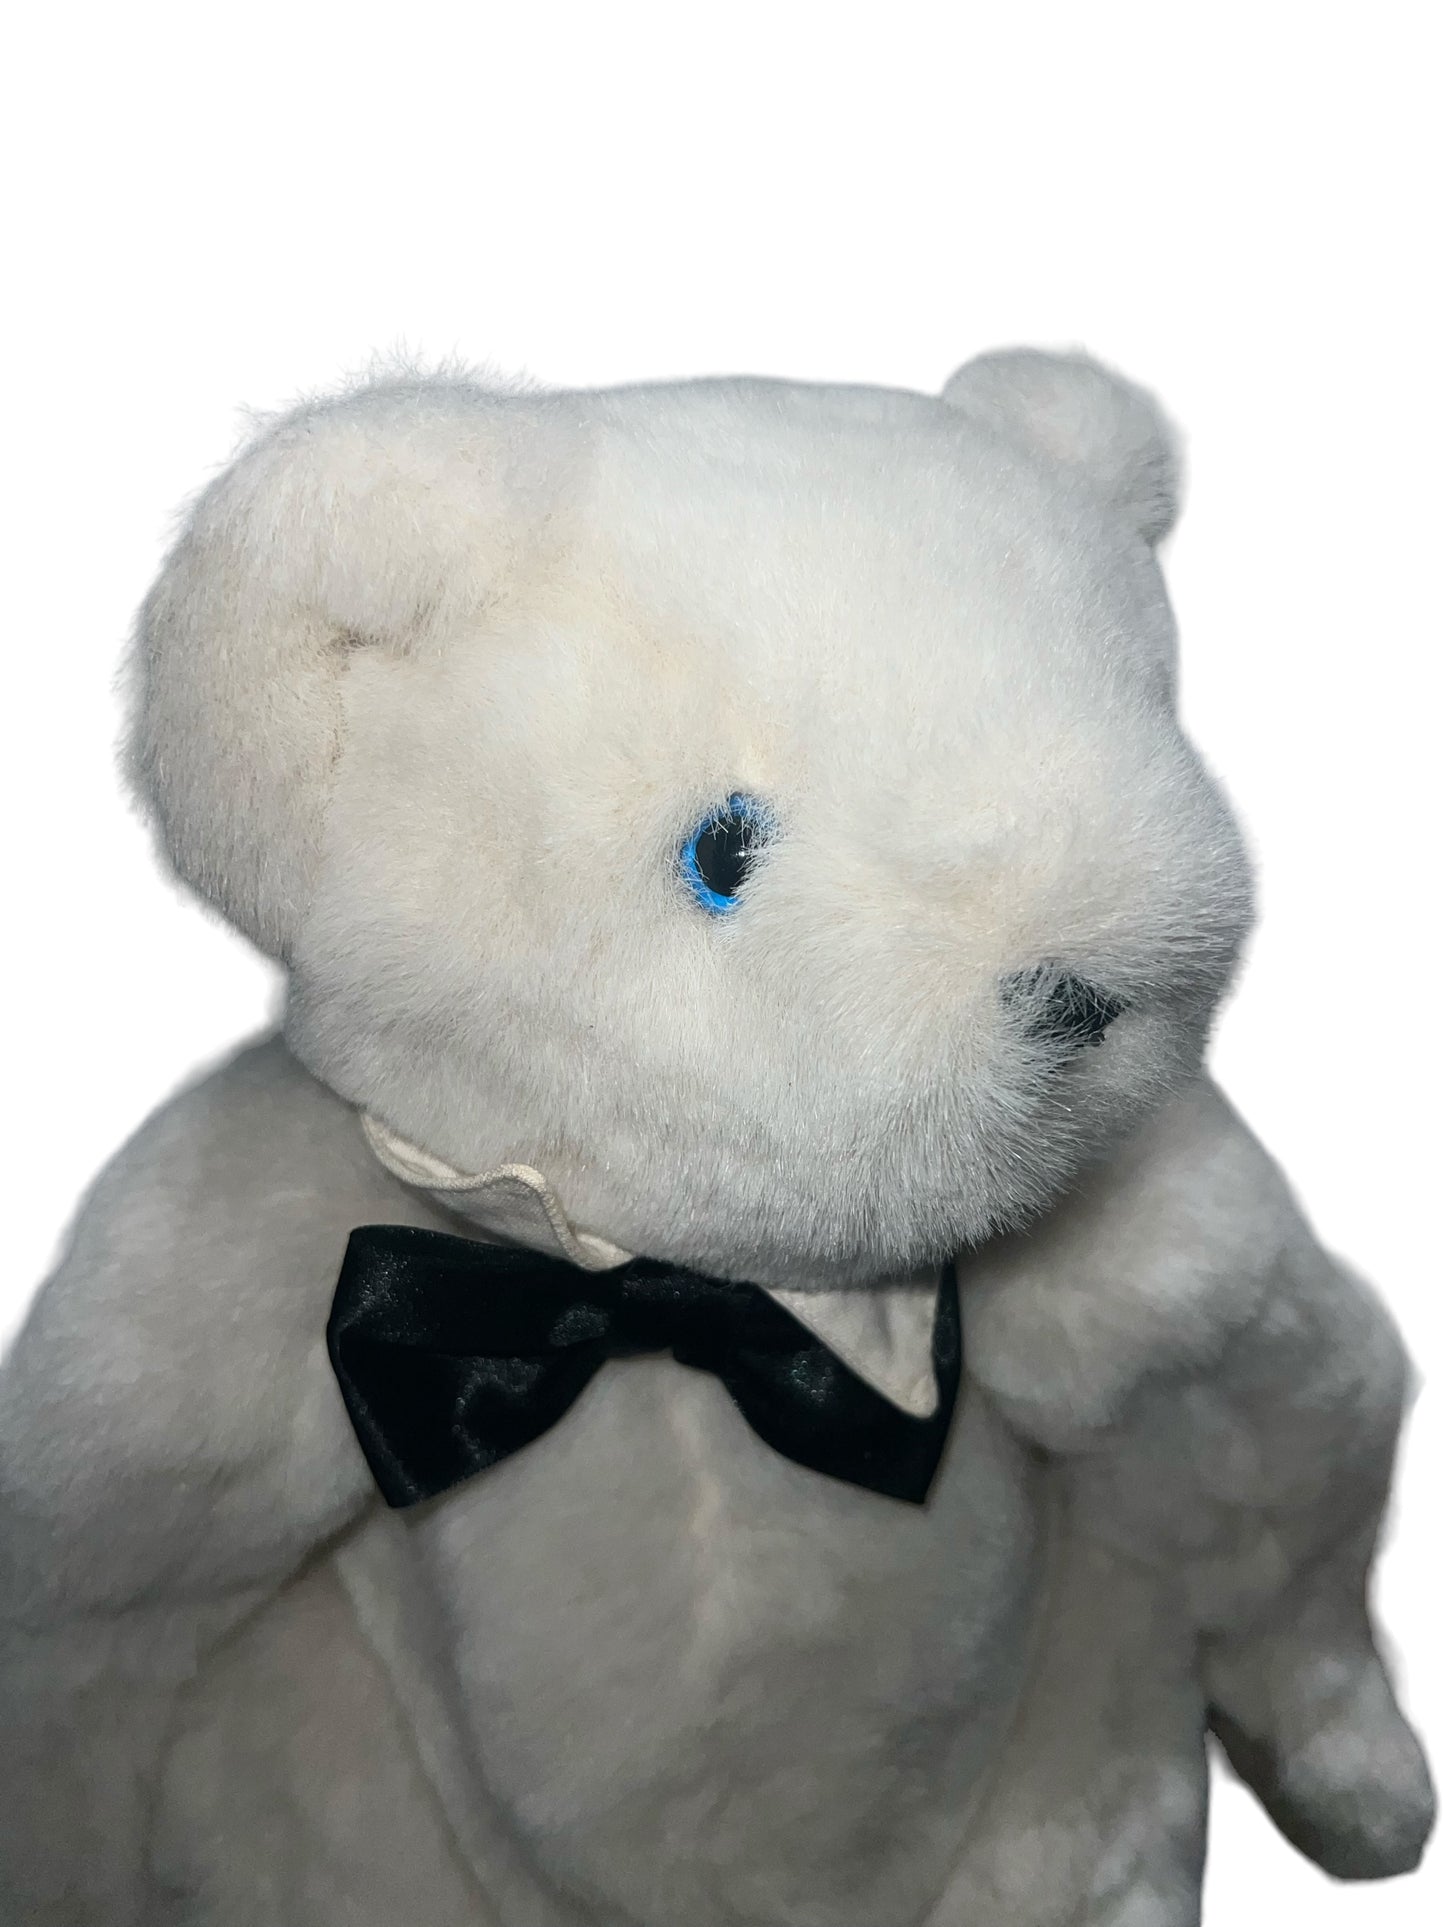 Vintage Vermont Teddy Bear Company 1991 White Bear with Black Bowtie and Blue Eyes